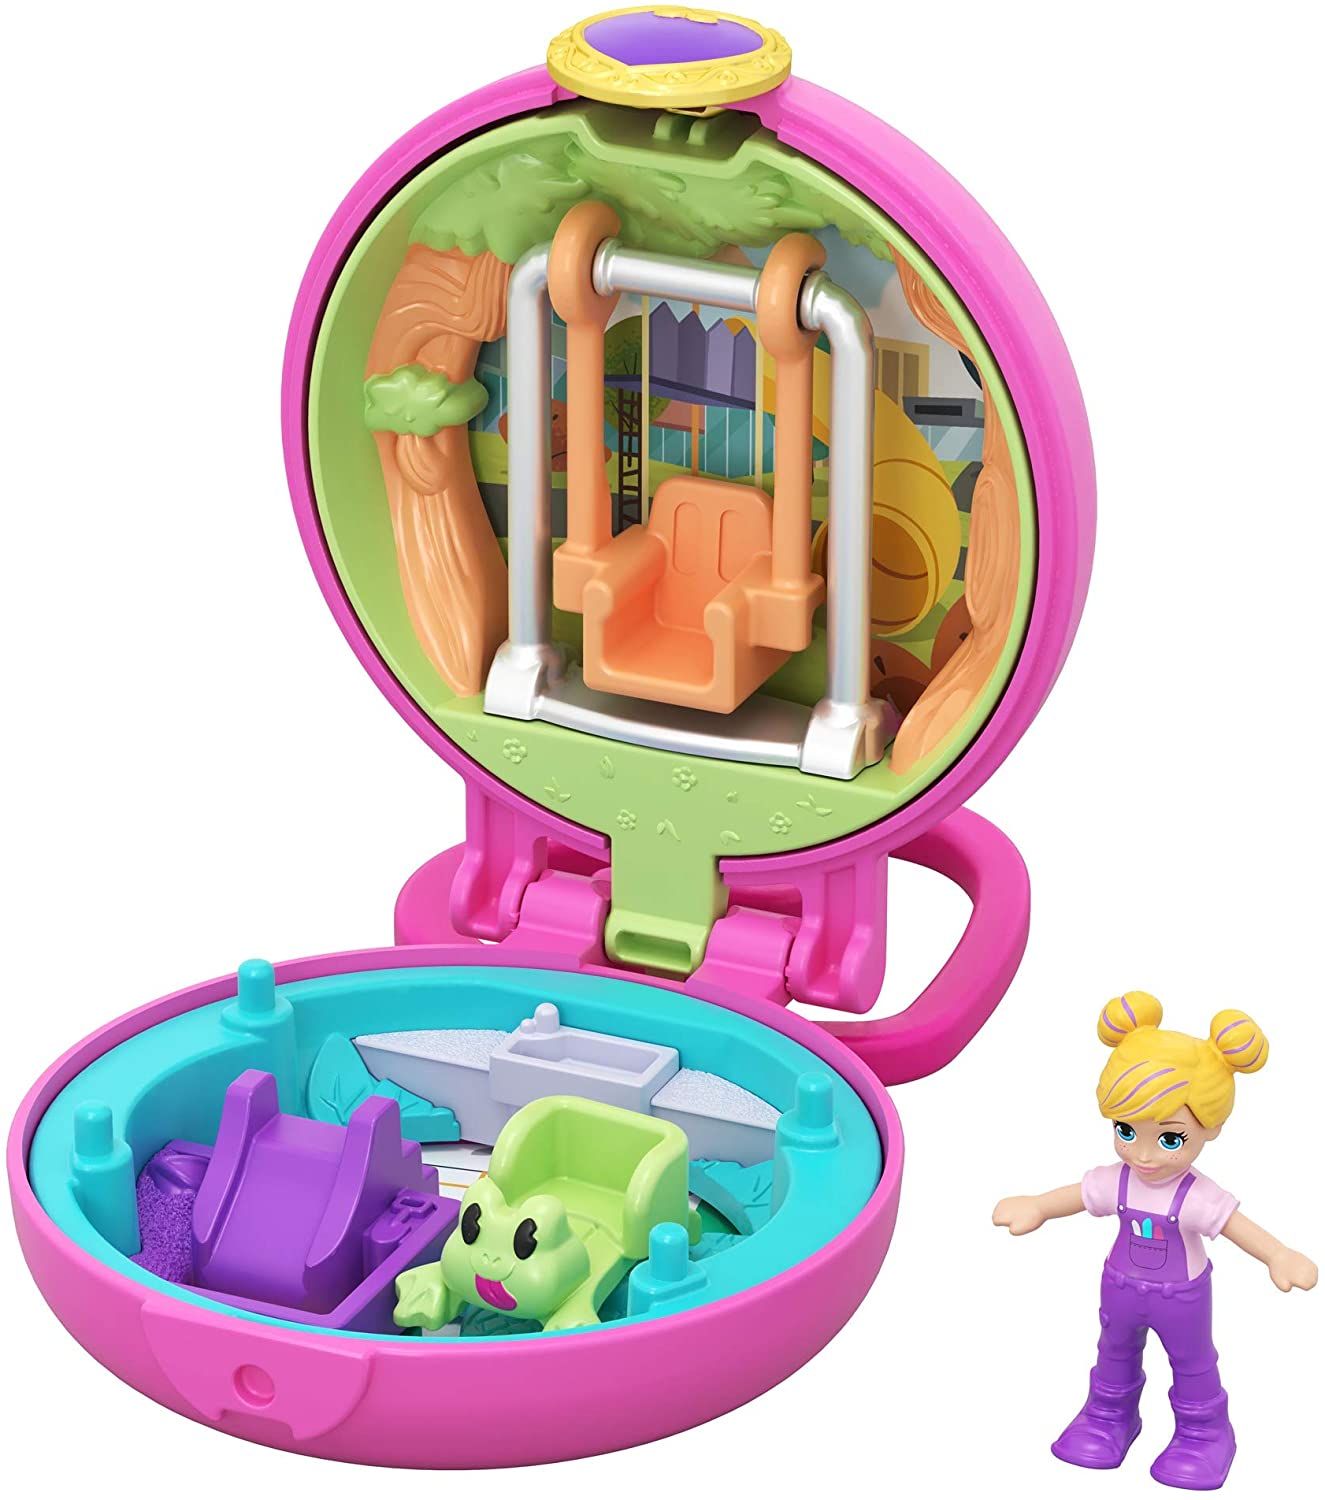 Polly Pocket Tiny Pocket Places Polly Playground Compact with